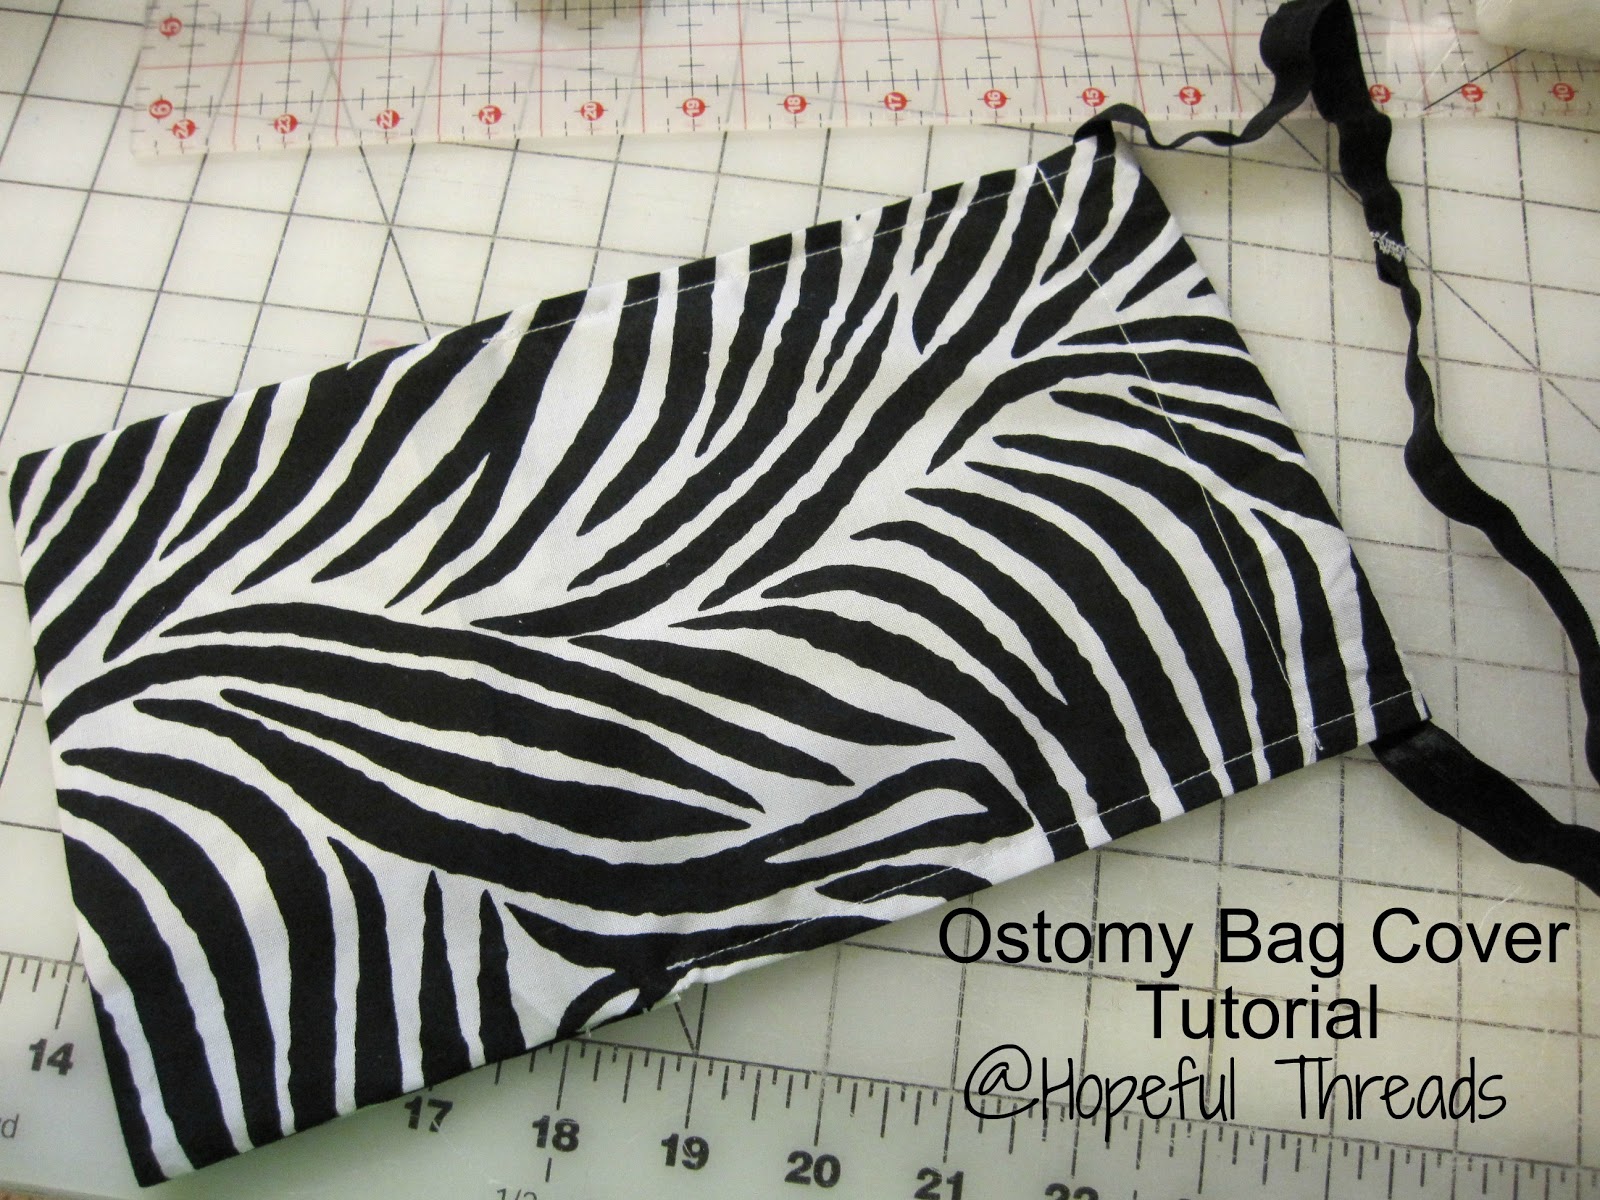 How to Make an Ostomy Bag Cover